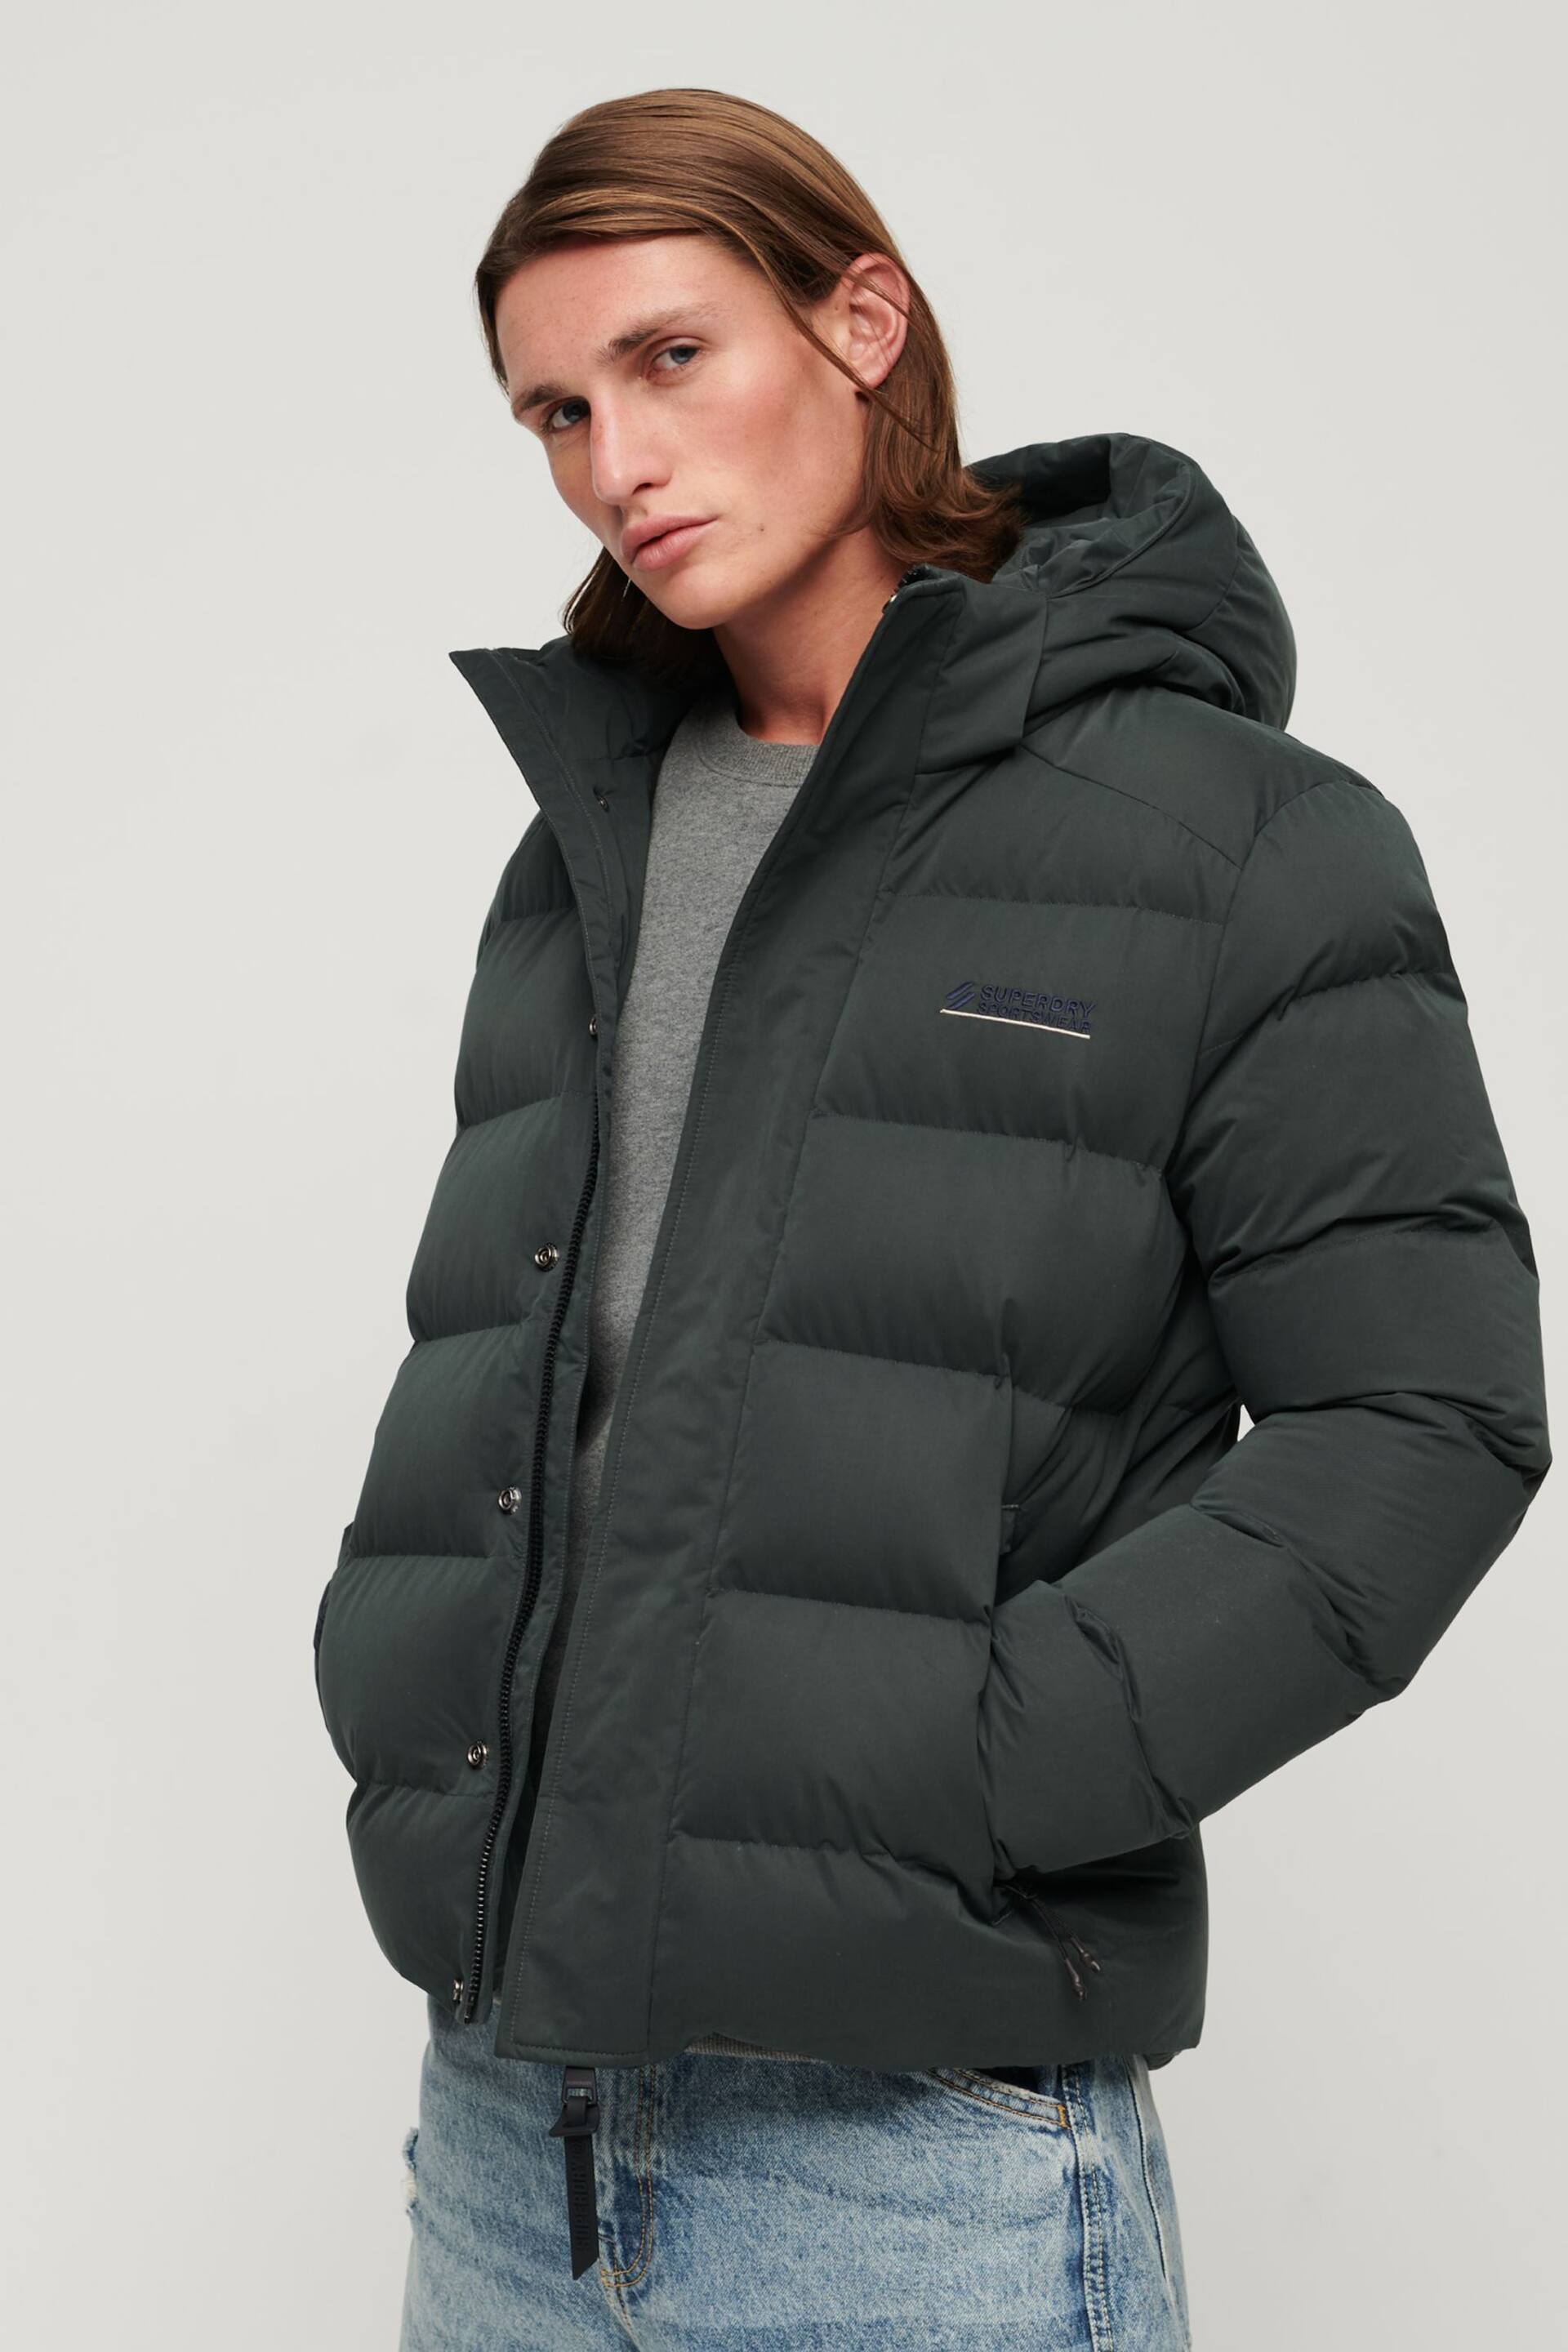 Superdry Green Hooded Microfibre Sports Puffer Jacket - Image 1 of 6